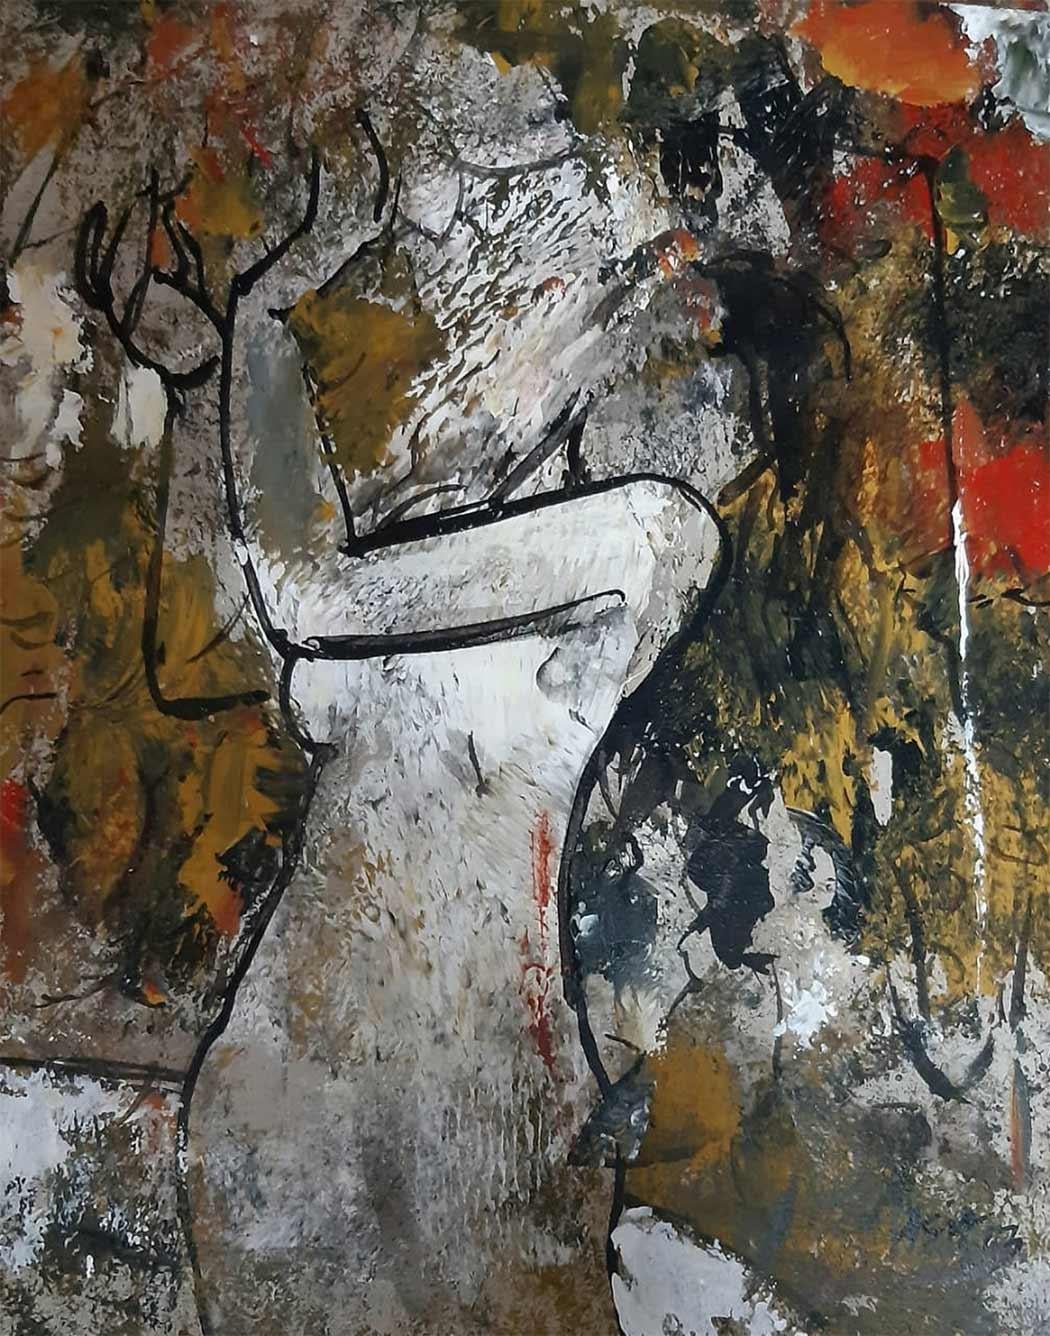 Ashit Sarkar Figurative Painting - Nude Woman, Acrylic on Paper, Red, Yellow, Brown by Indian Artist "In Stock"